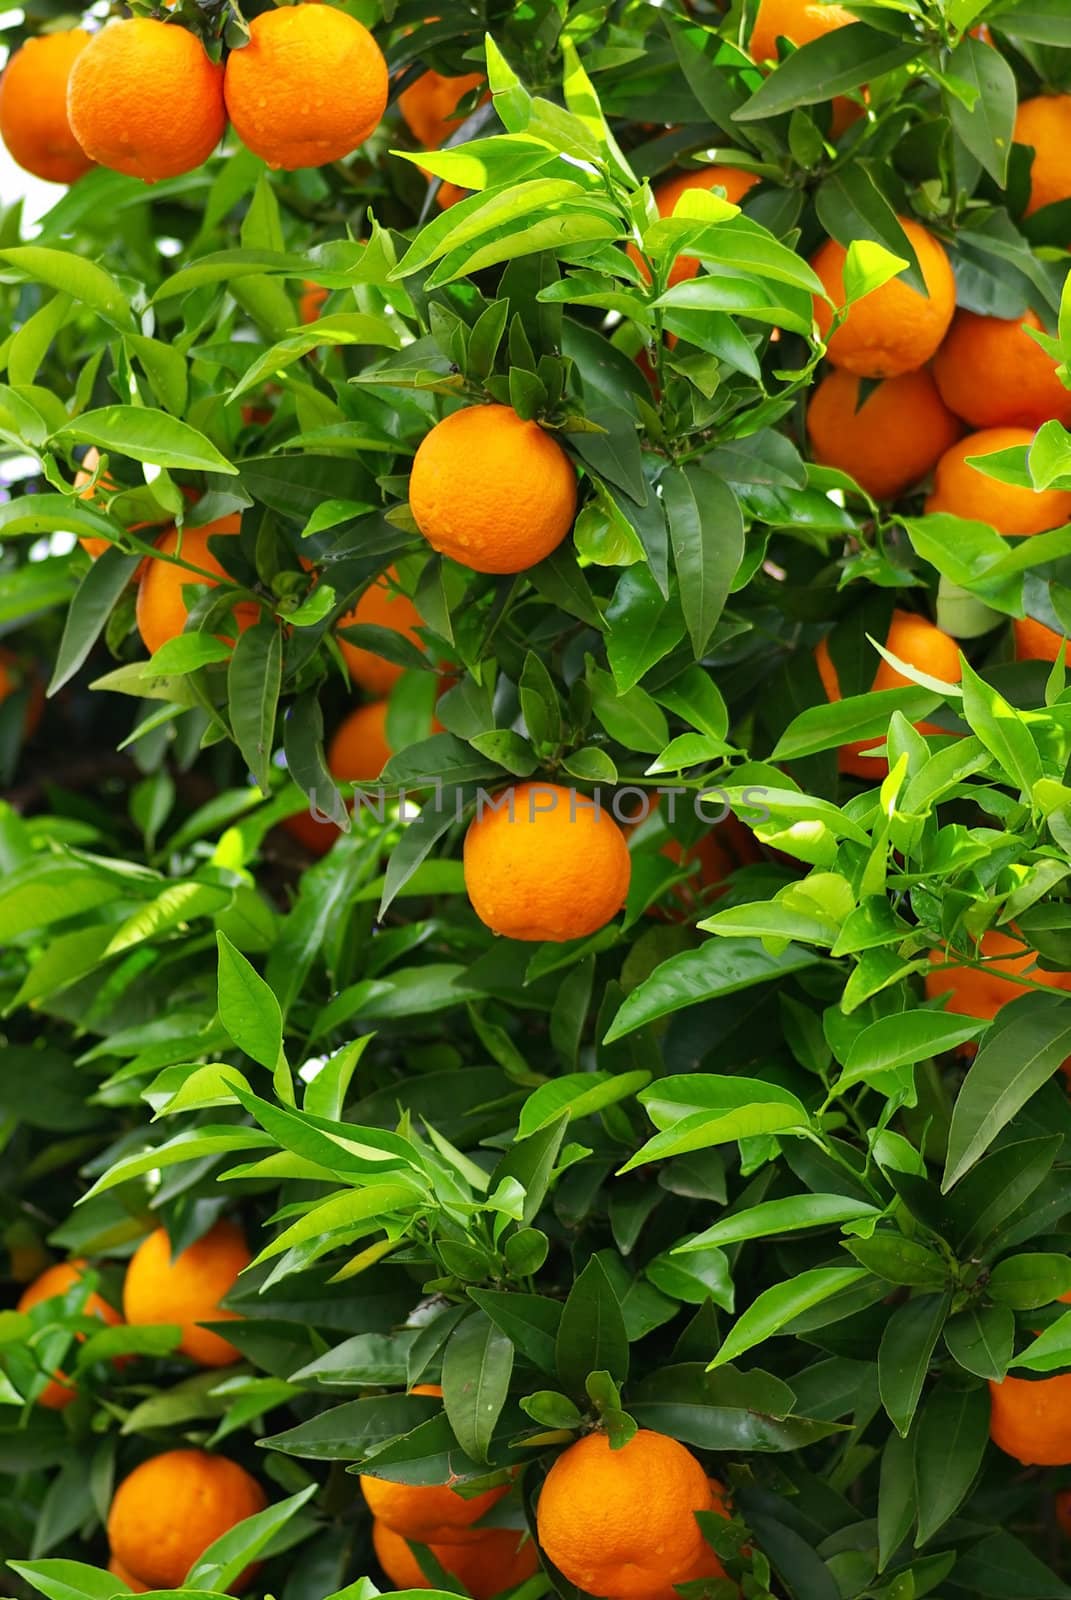 Green leaves and mature oranges on the tree.